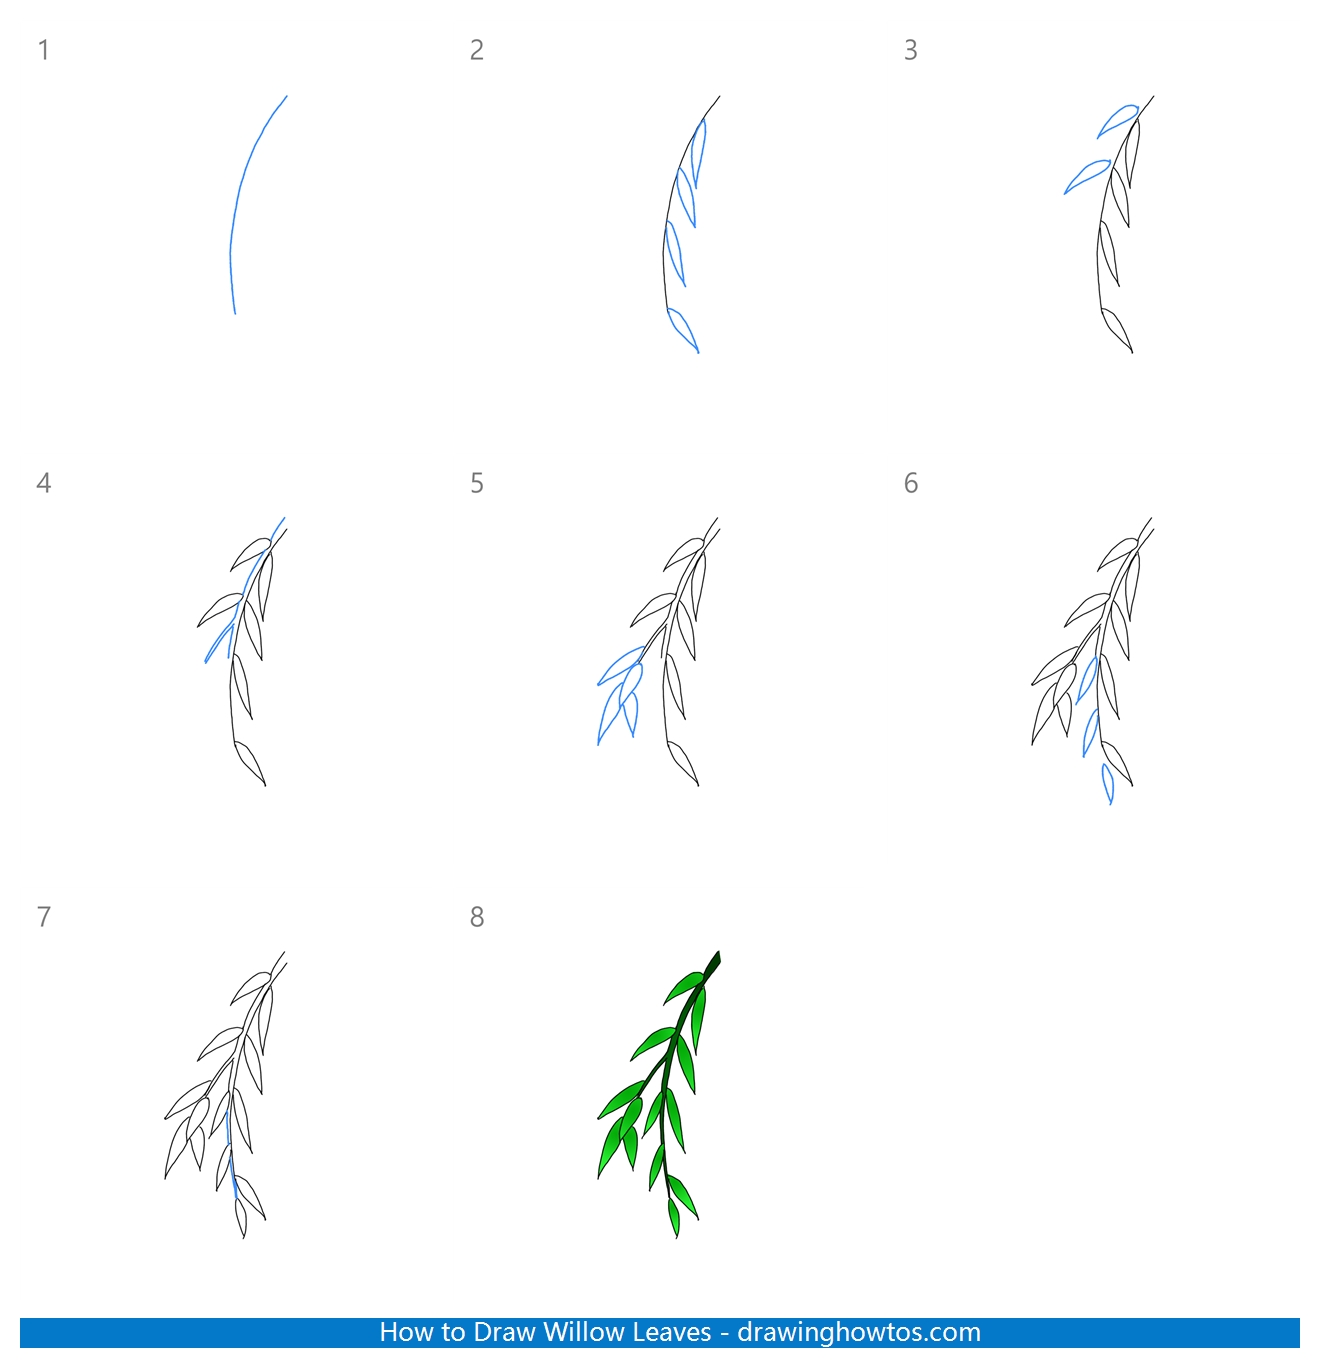 How to Draw Willow Leaves Step by Step